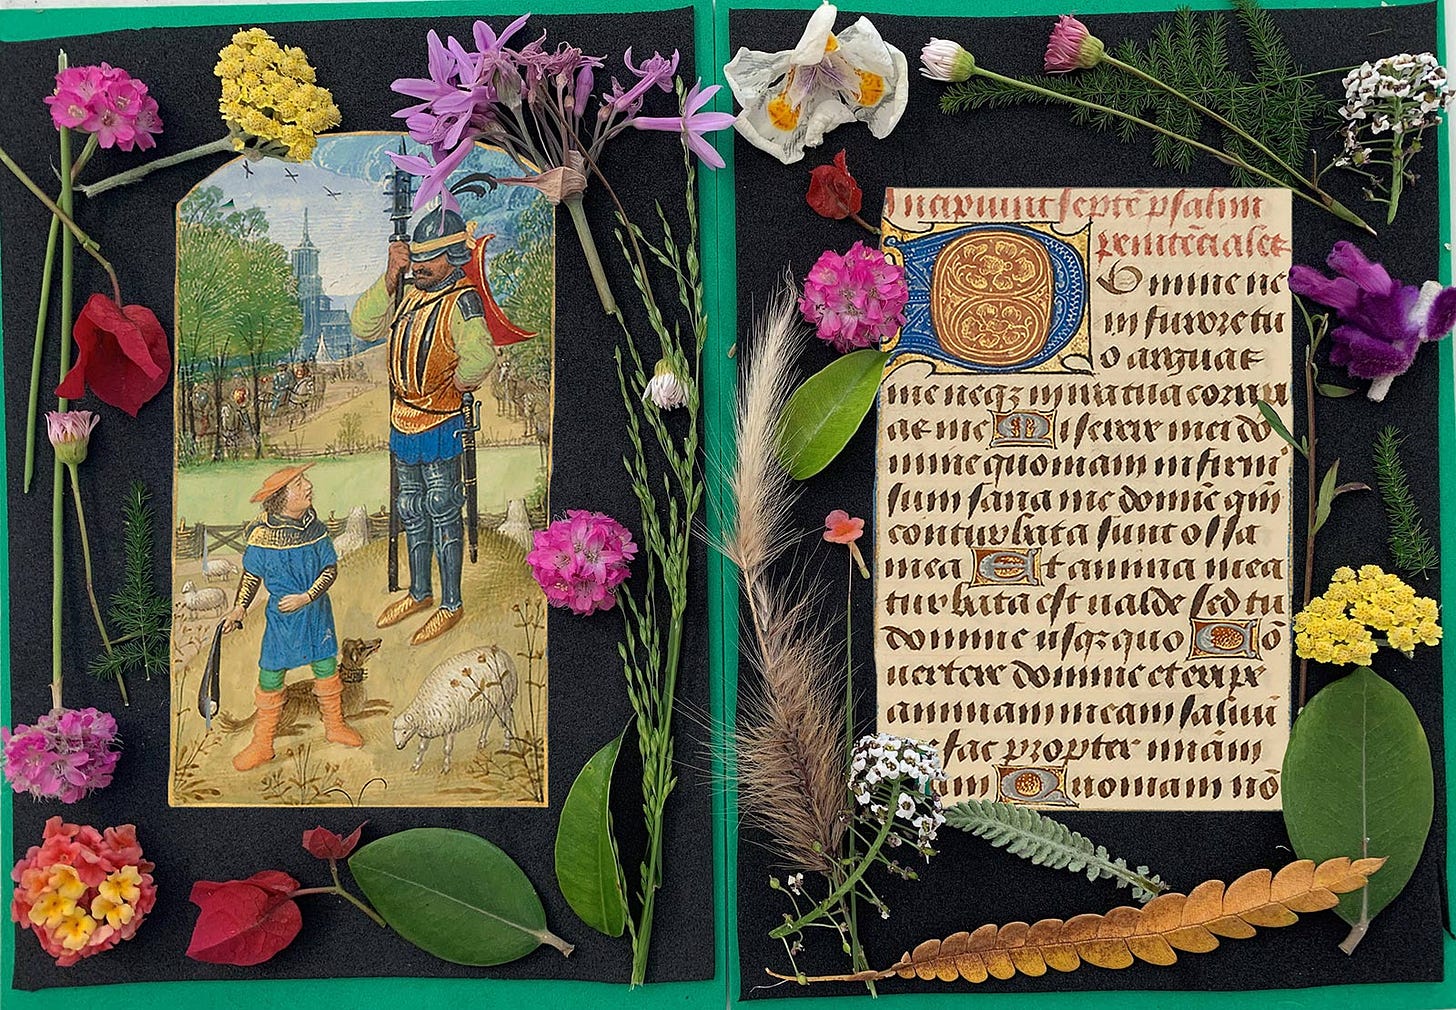 Manuscript images pasted on black background, decorated with flowers around the borders